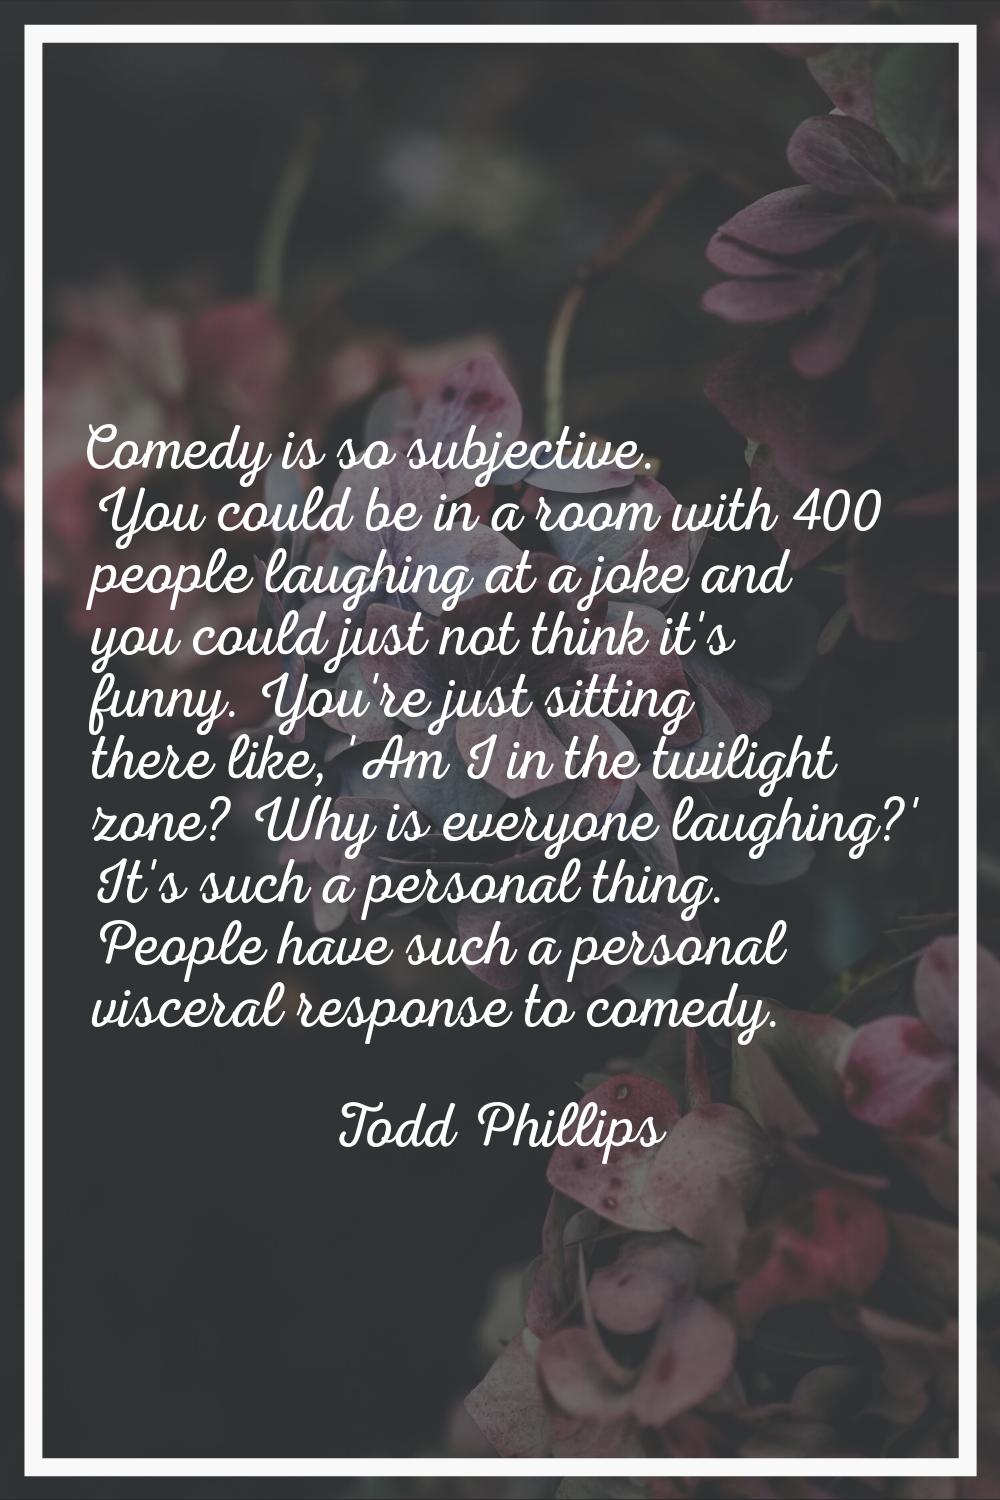 Comedy is so subjective. You could be in a room with 400 people laughing at a joke and you could ju